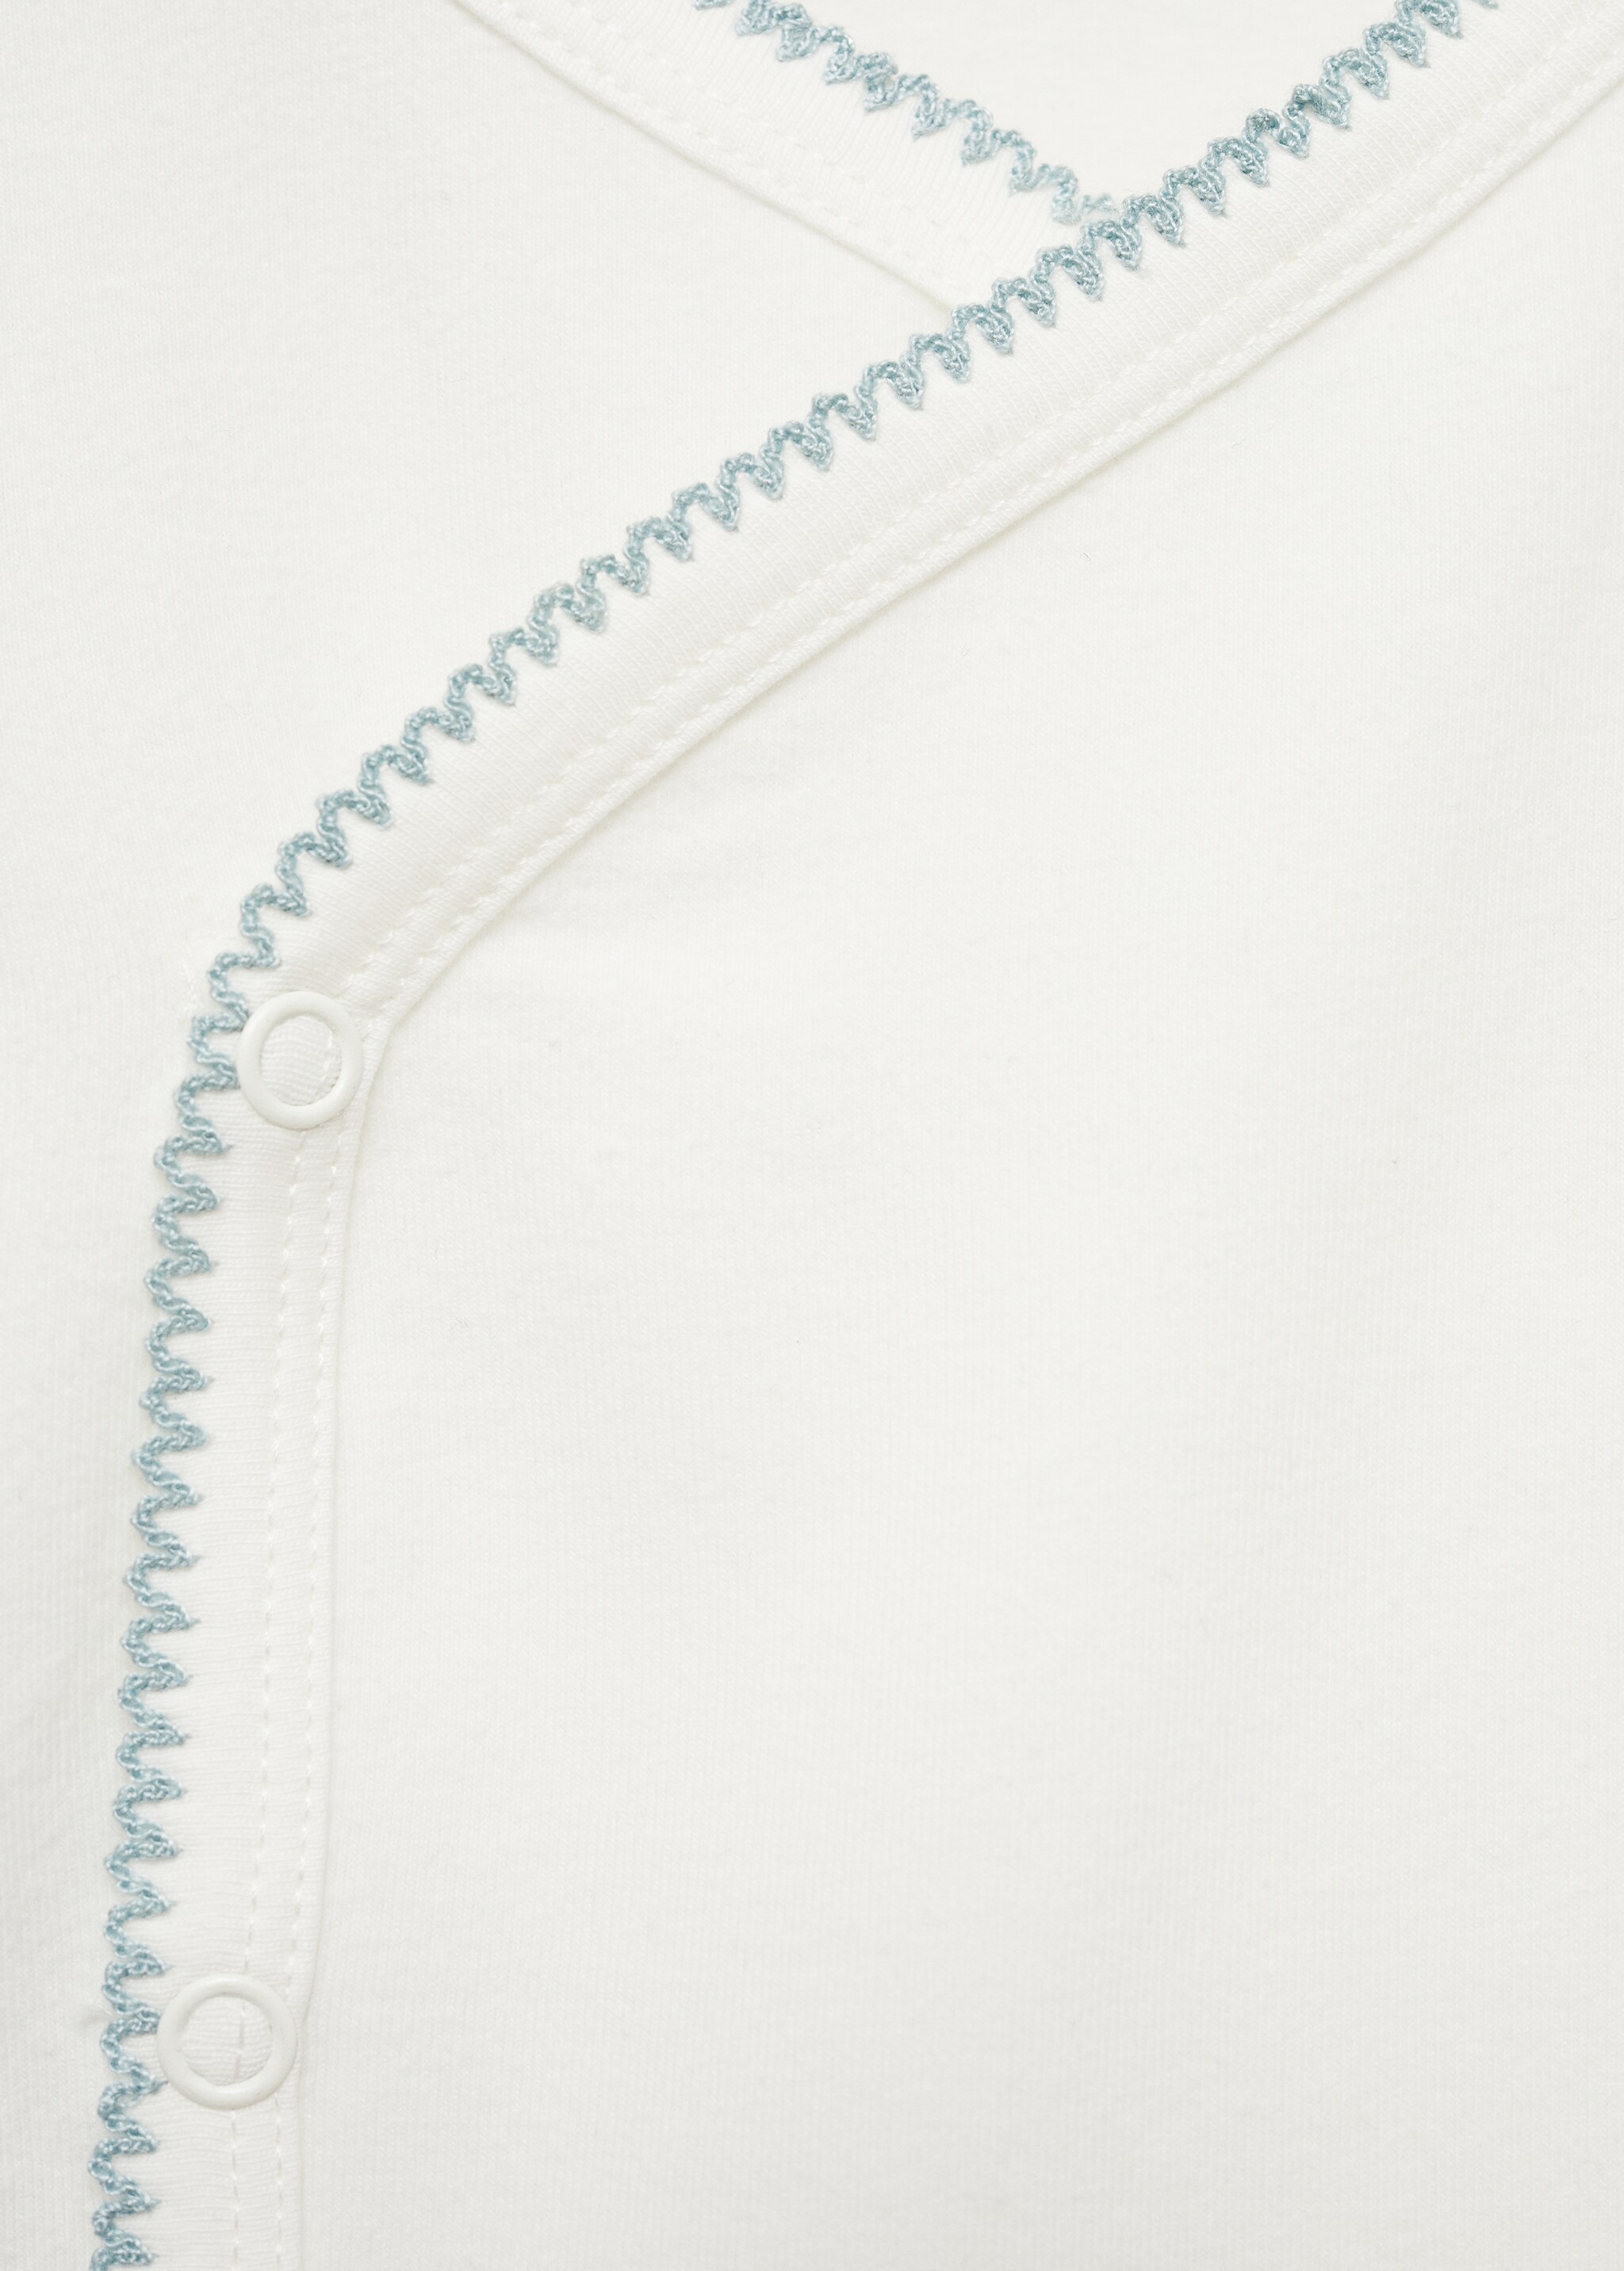 Cotton body - Details of the article 0